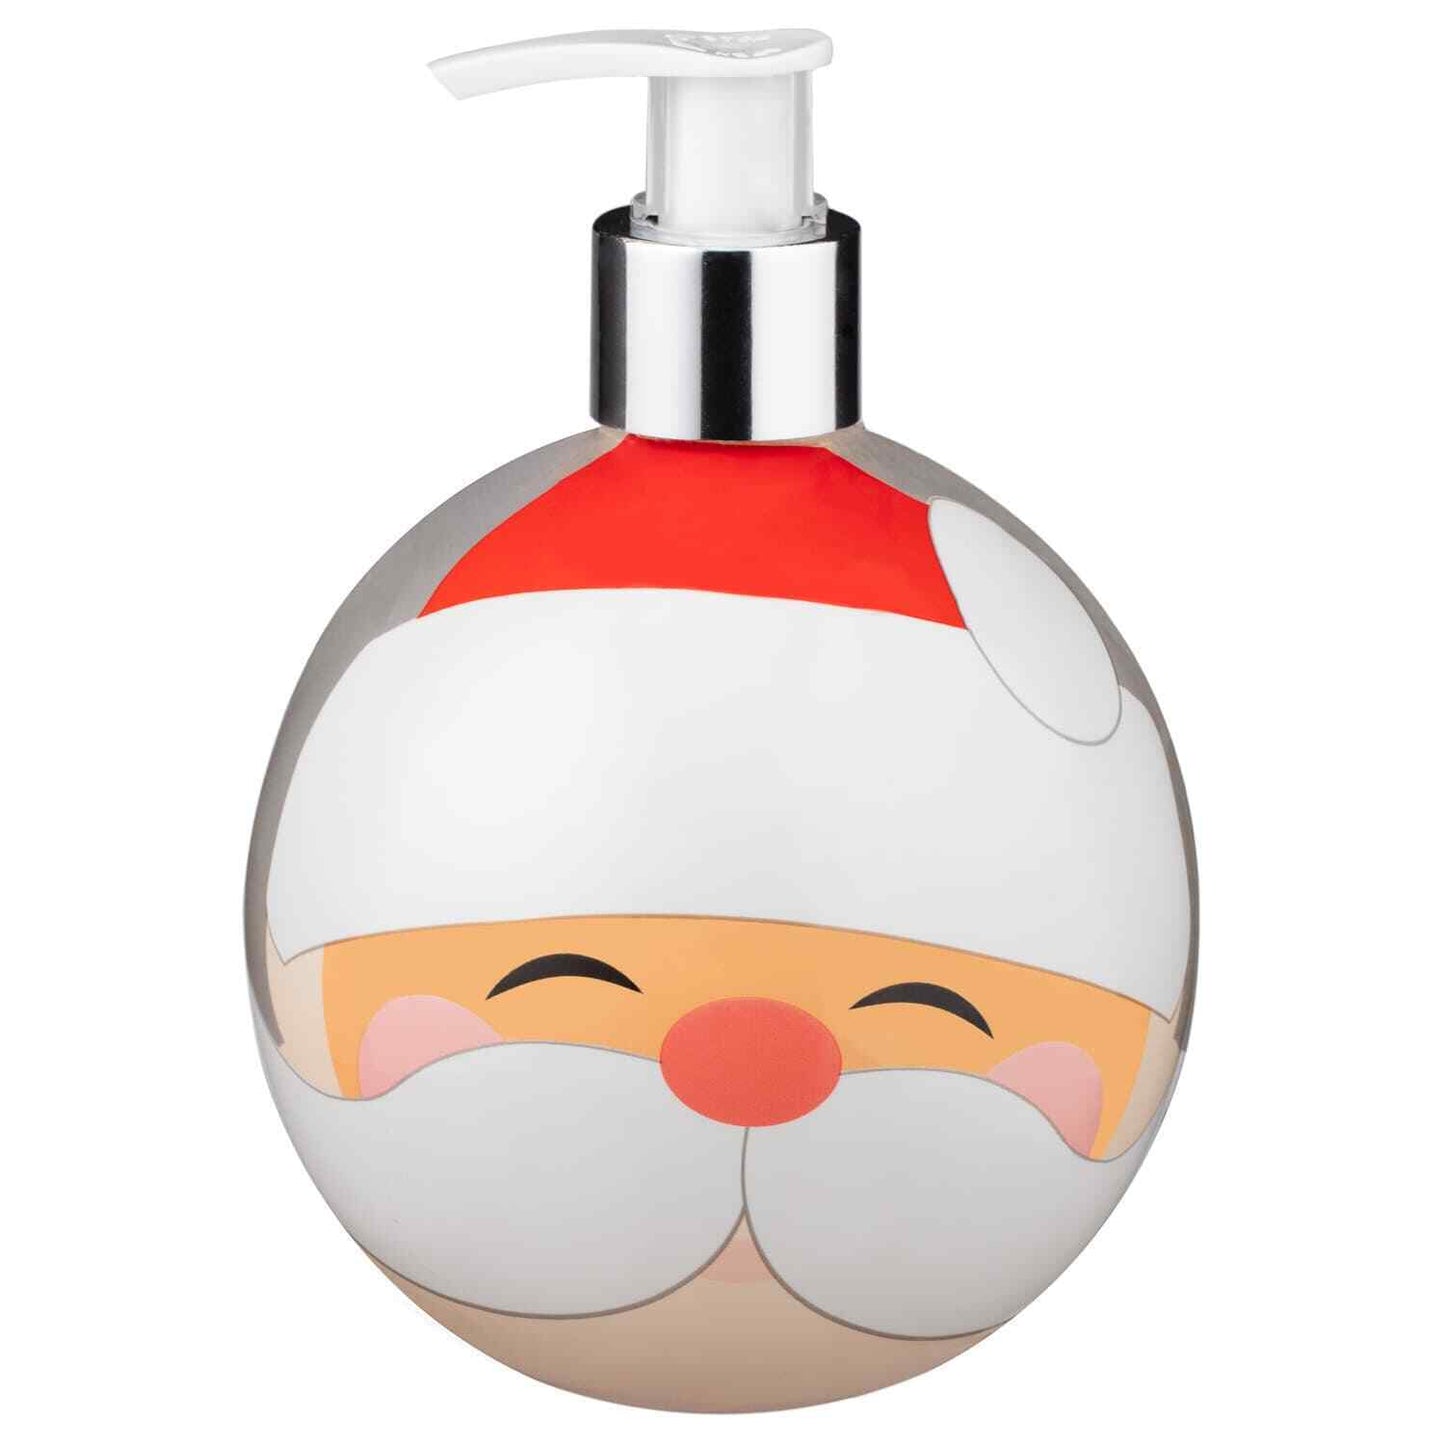 500ml Filled Scented Christmas Festive Bauble Xmas Hand Wash in Soap Dispenser